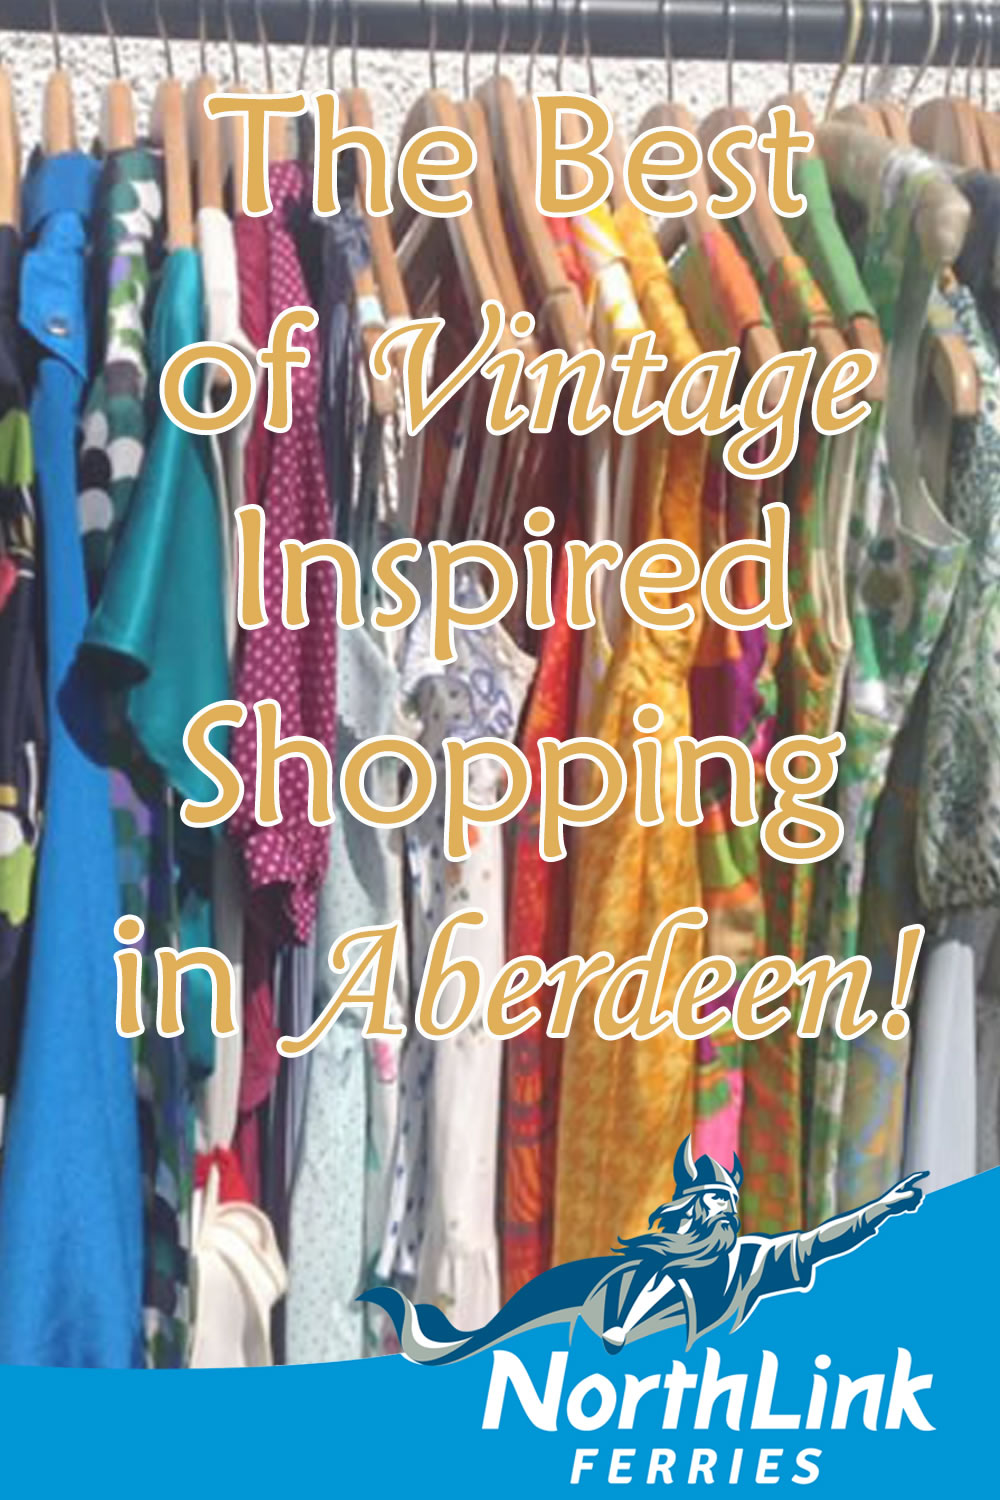 The Best of Vintage Inspired Shopping in Aberdeen